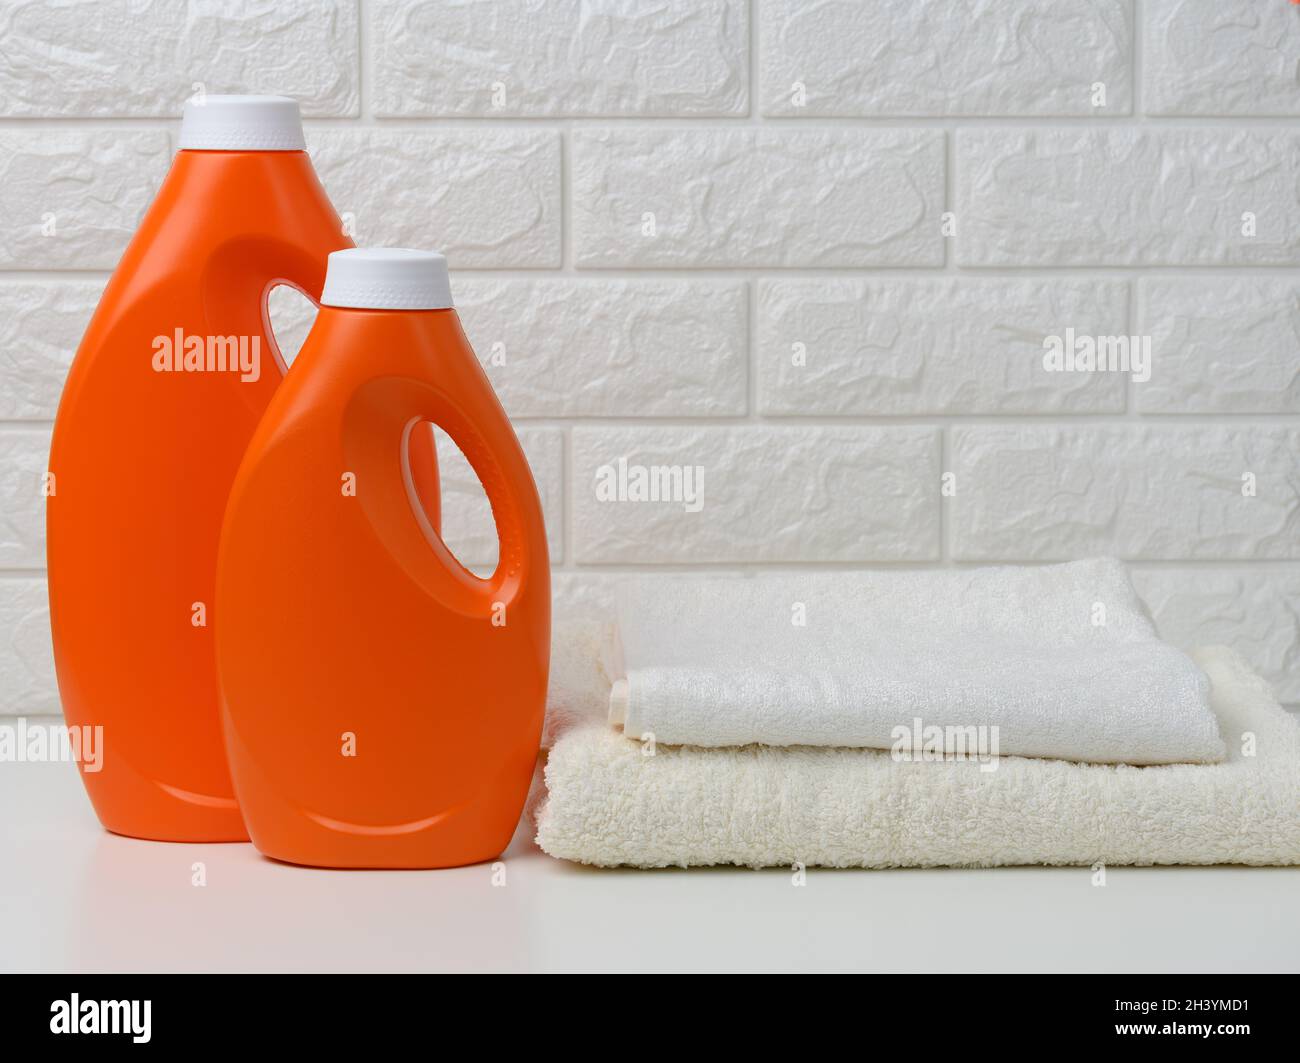 Two orange plastic bottles of liquid detergent and a stack of towels on a white shelf, home wash Stock Photo